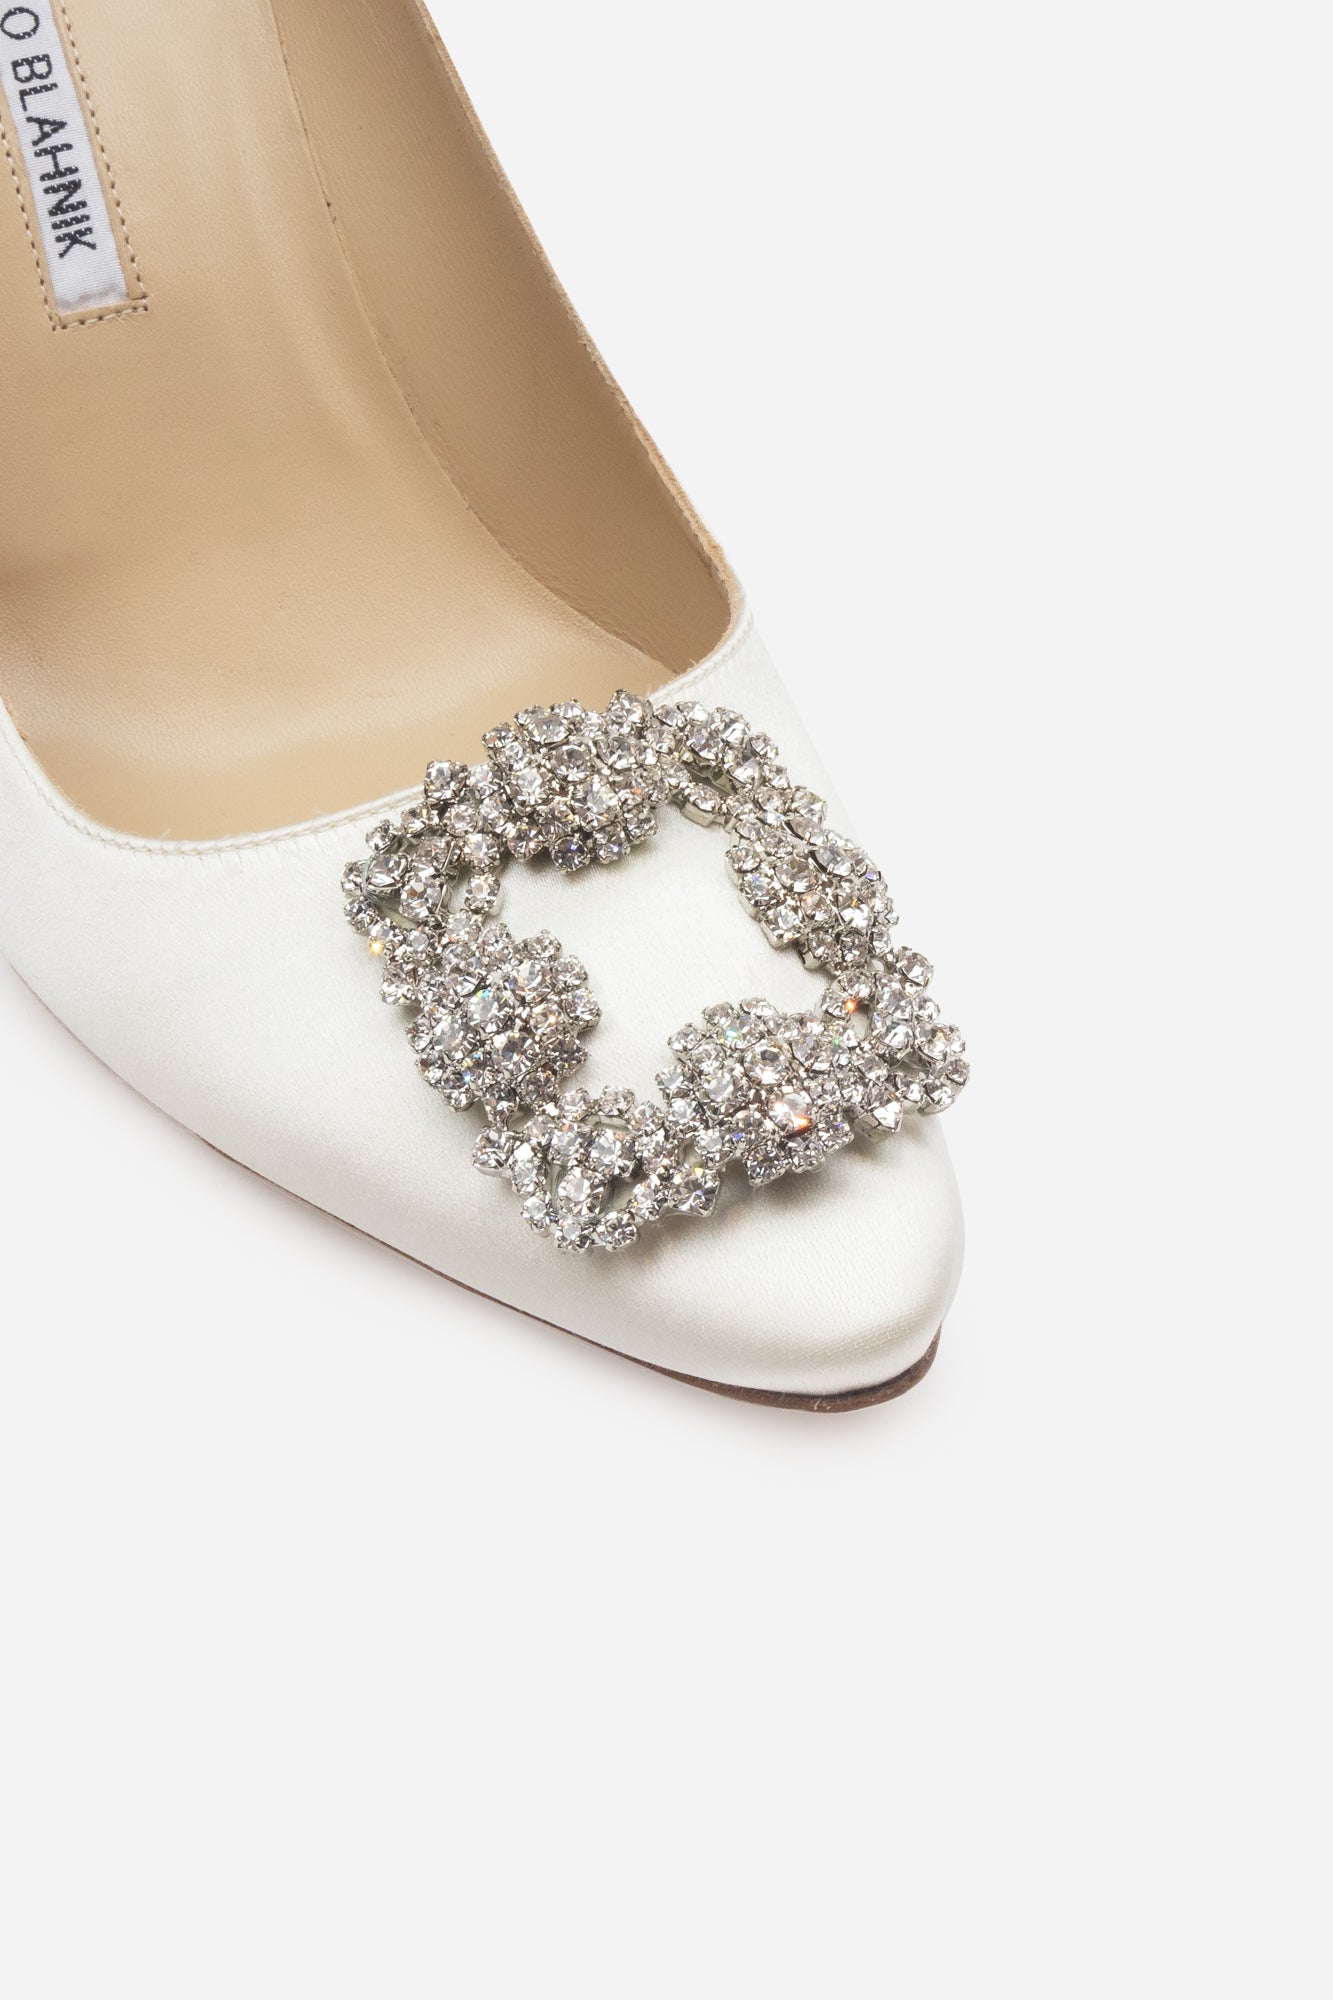 Hangisi Classic White Satin with Crystal Toe Square